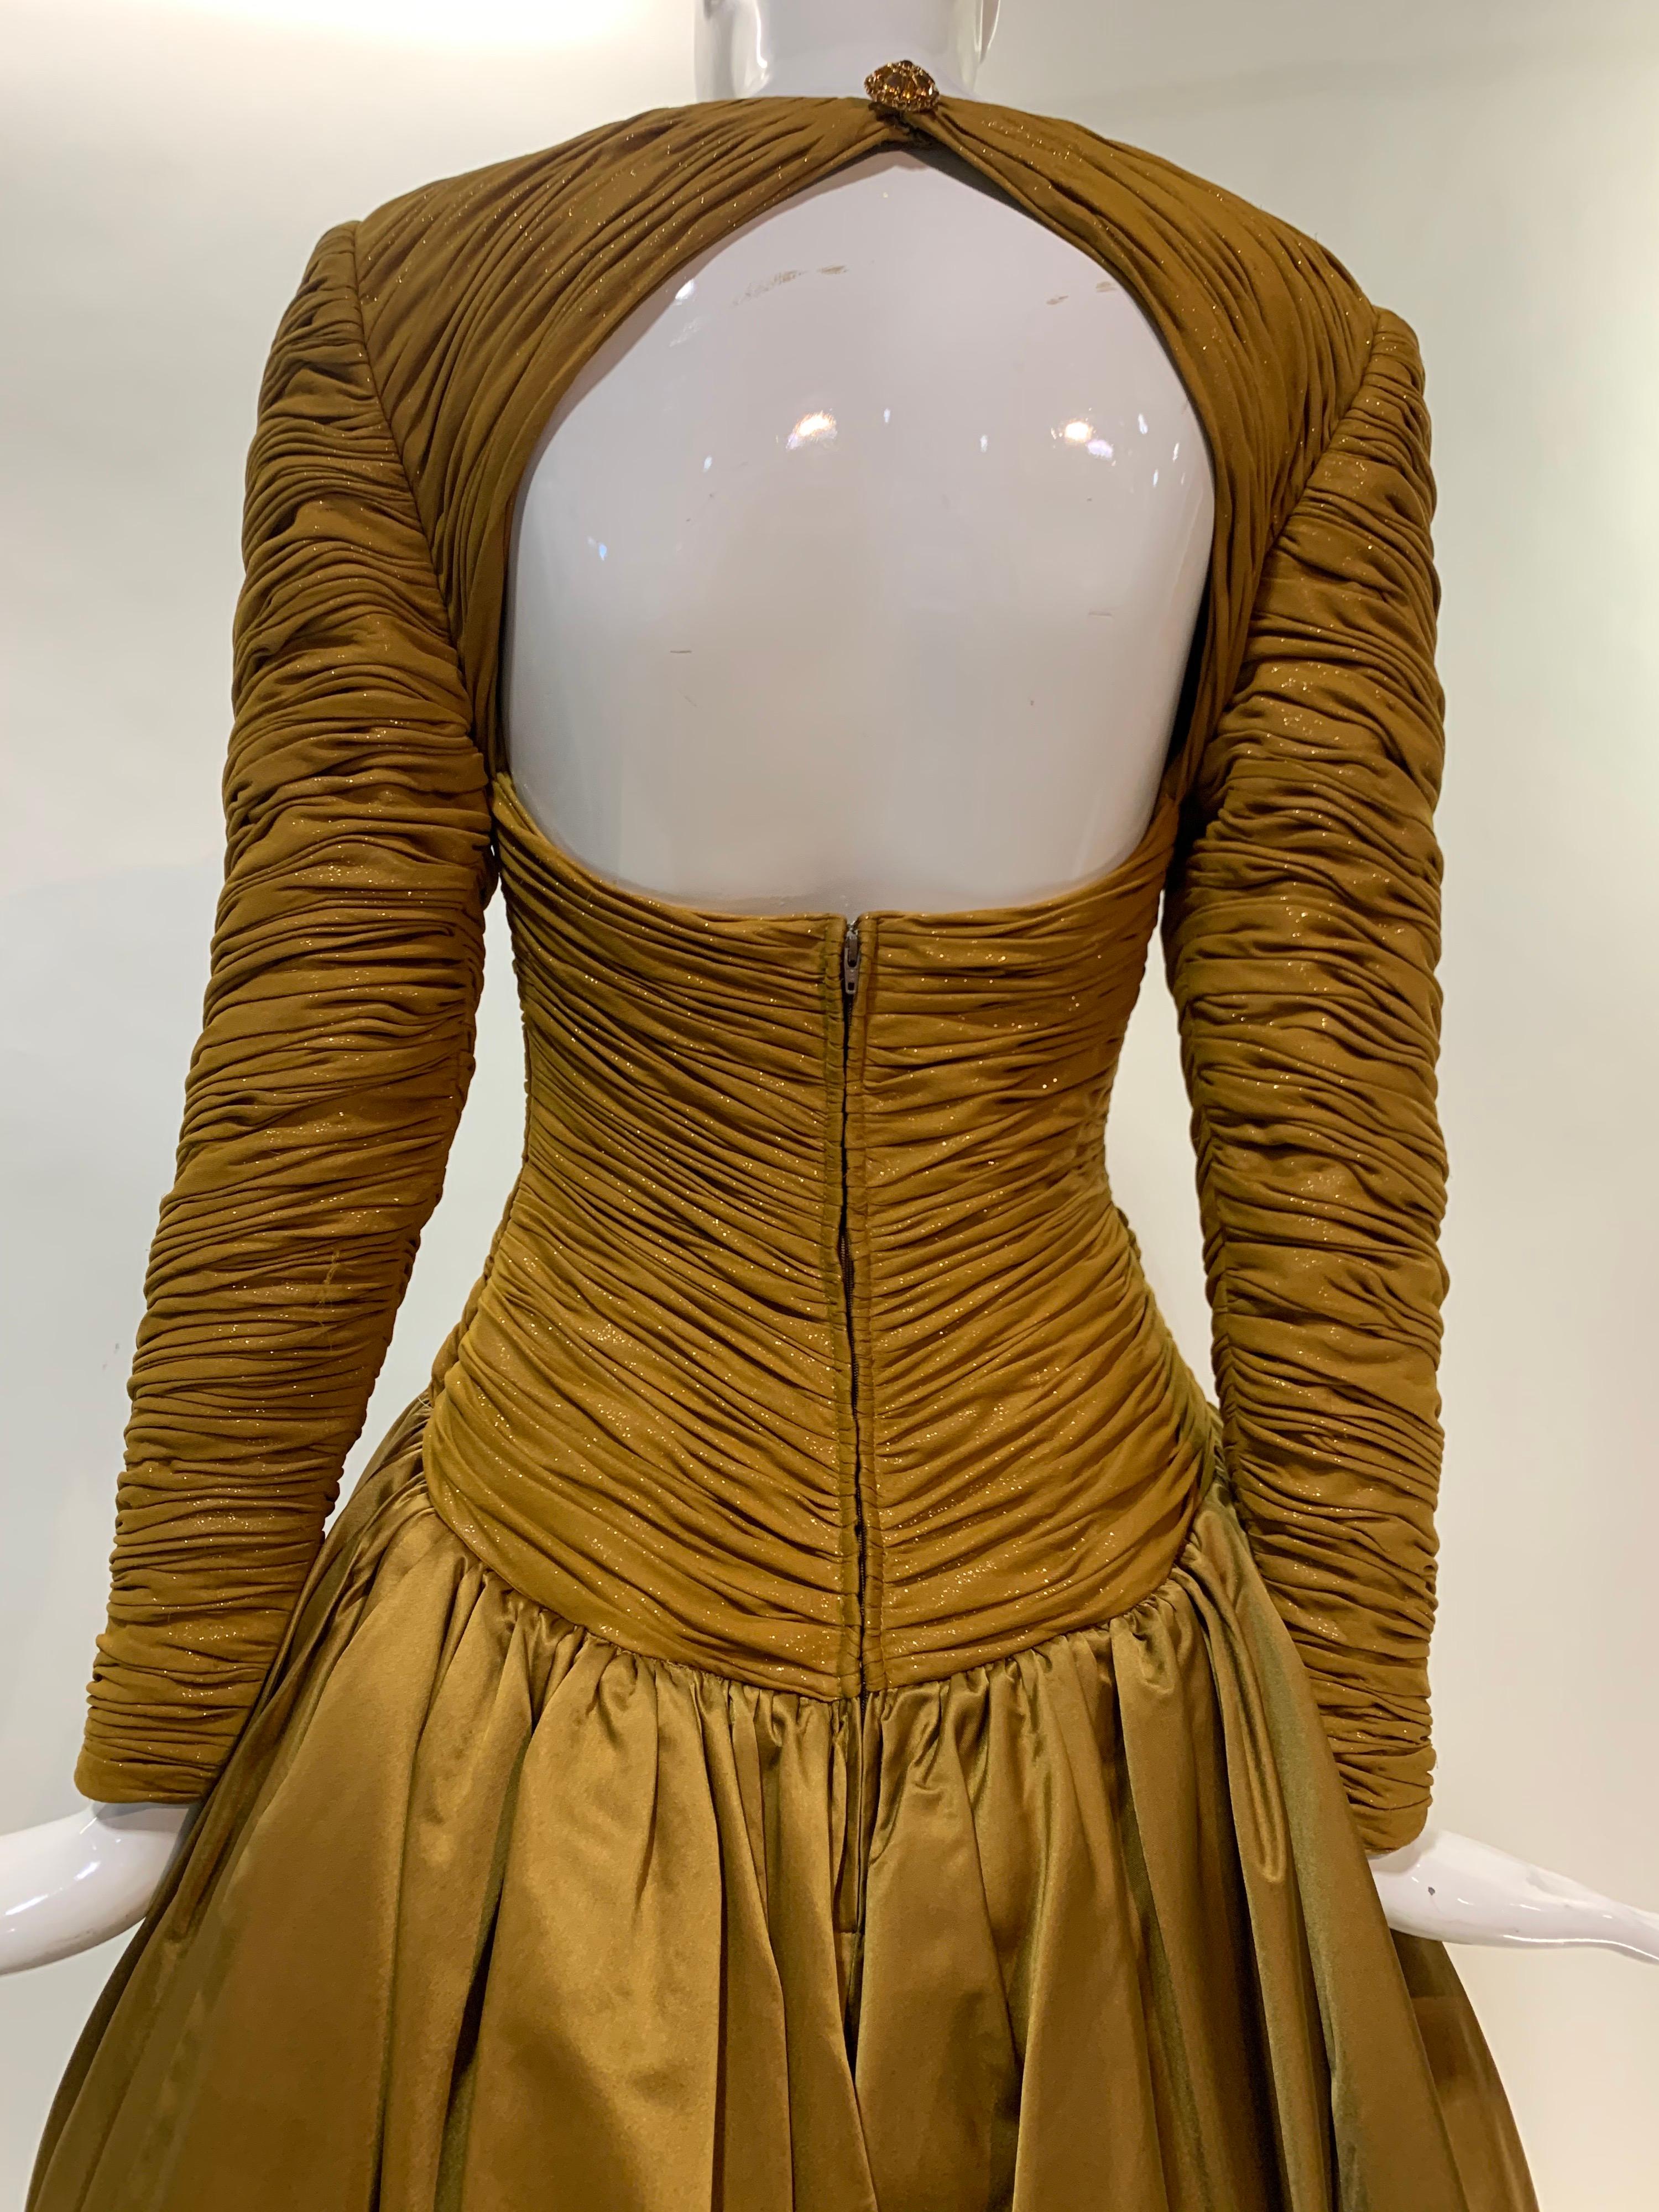 1990s Demi-Couture Gold Silk Ball Gown w/ Velvet Sheath & Dramatic Satin Skirt  For Sale 4